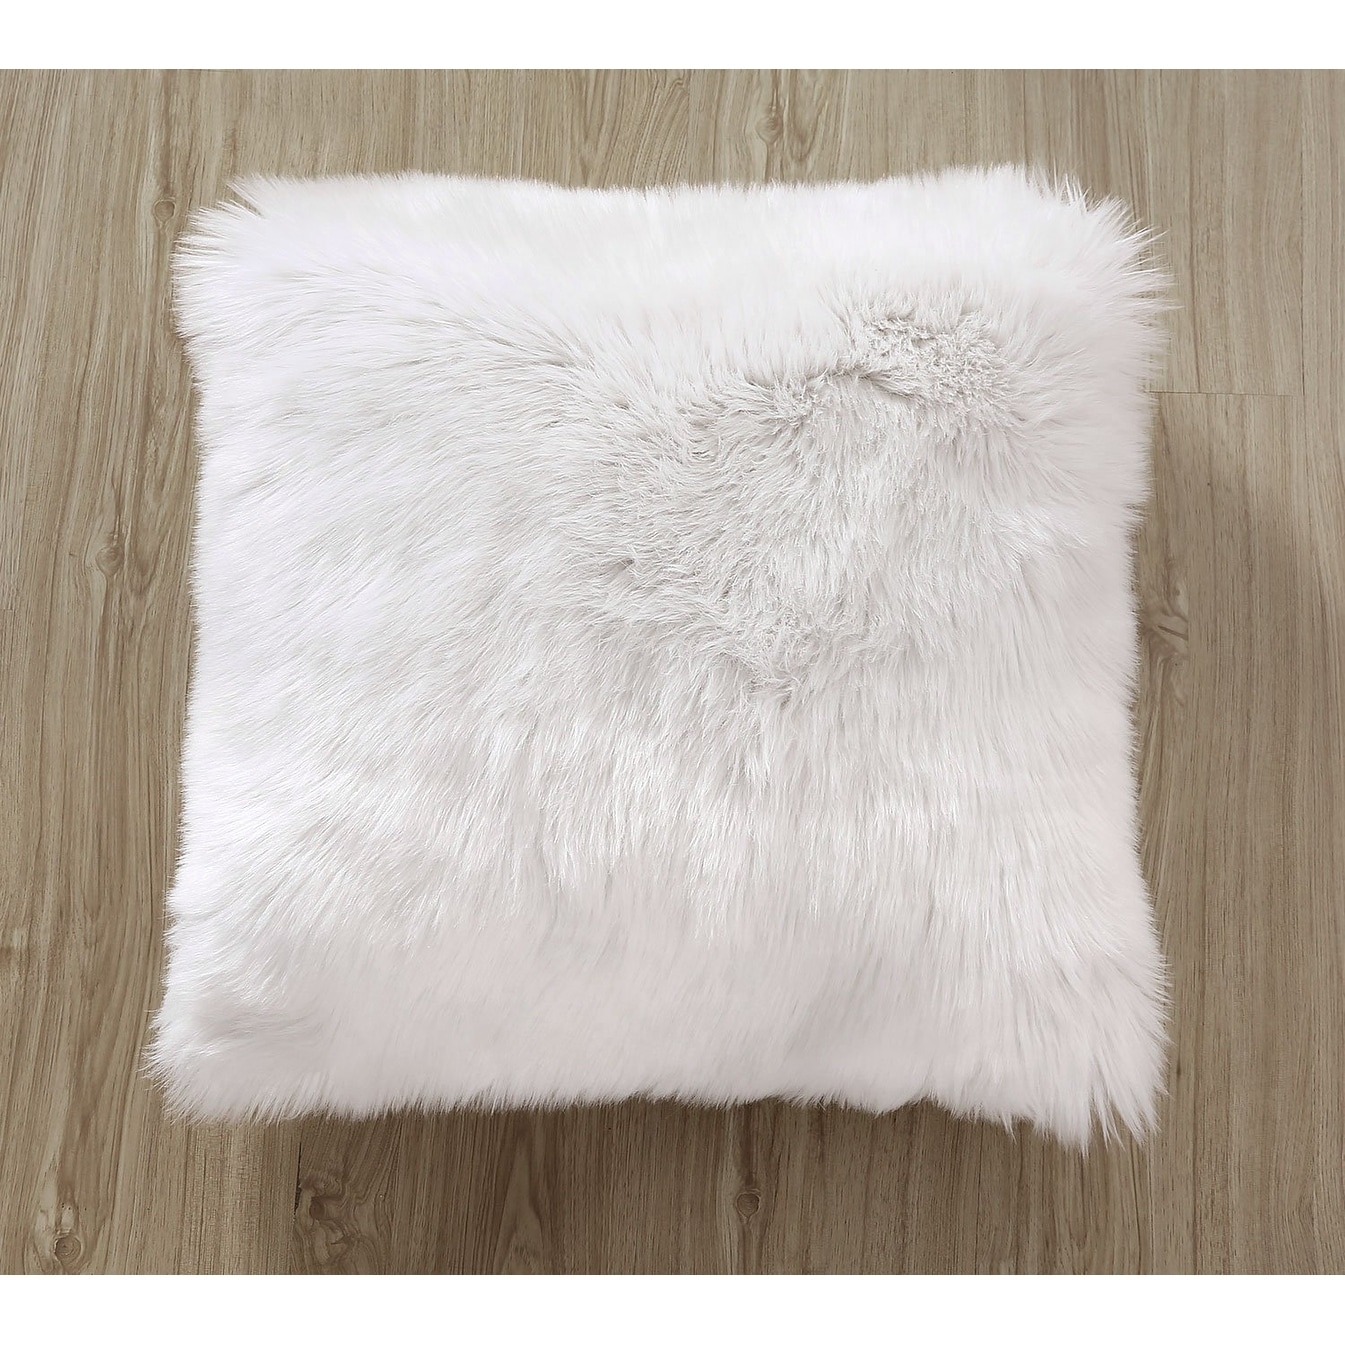 https://ak1.ostkcdn.com/images/products/is/images/direct/15dd16a0bf4851caf319f0304e51720b364096ac/Super-Soft-Plush-White-Mongolian-Faux-Fur-Throw-Pillow-Cover.jpg